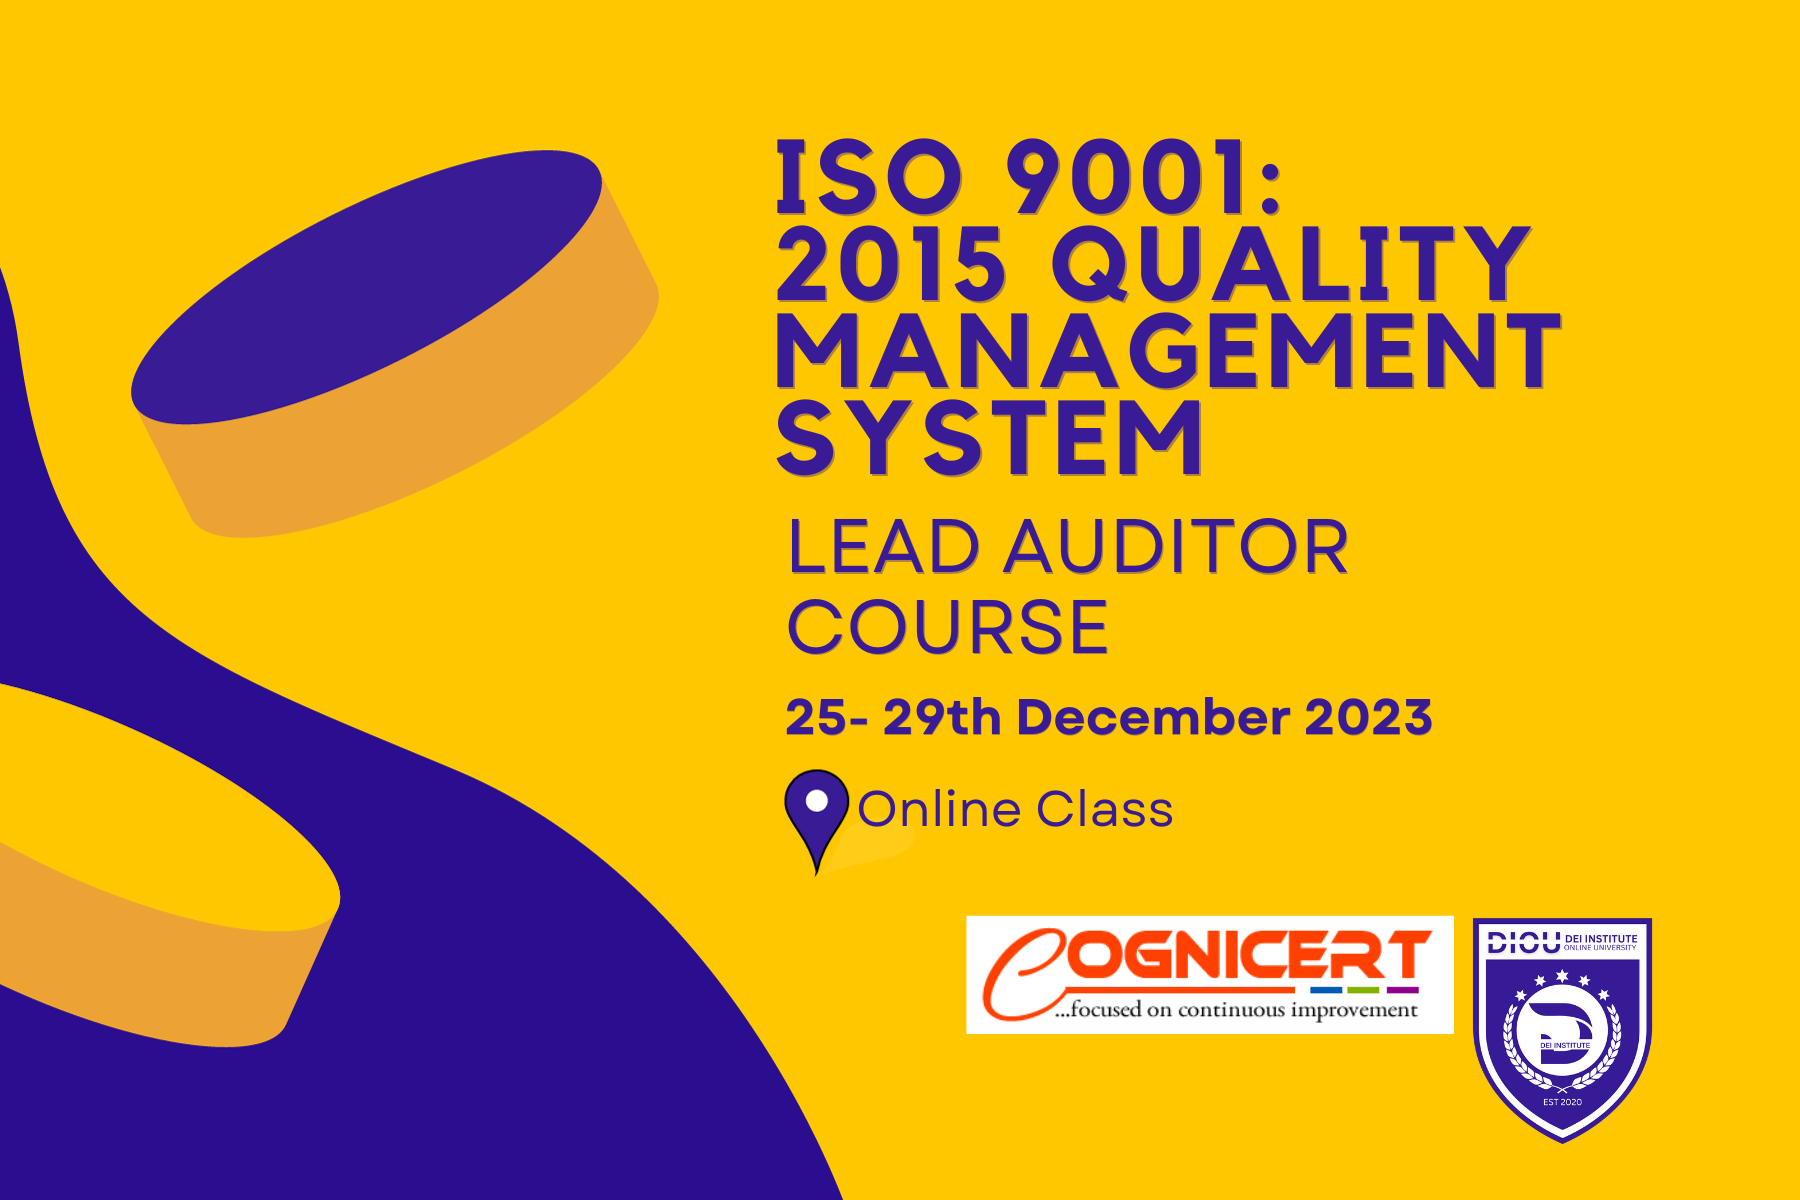 ISO 9001: 2015 QUALITY MANAGEMENT SYSTEM – LEAD AUDITOR COURSE ...